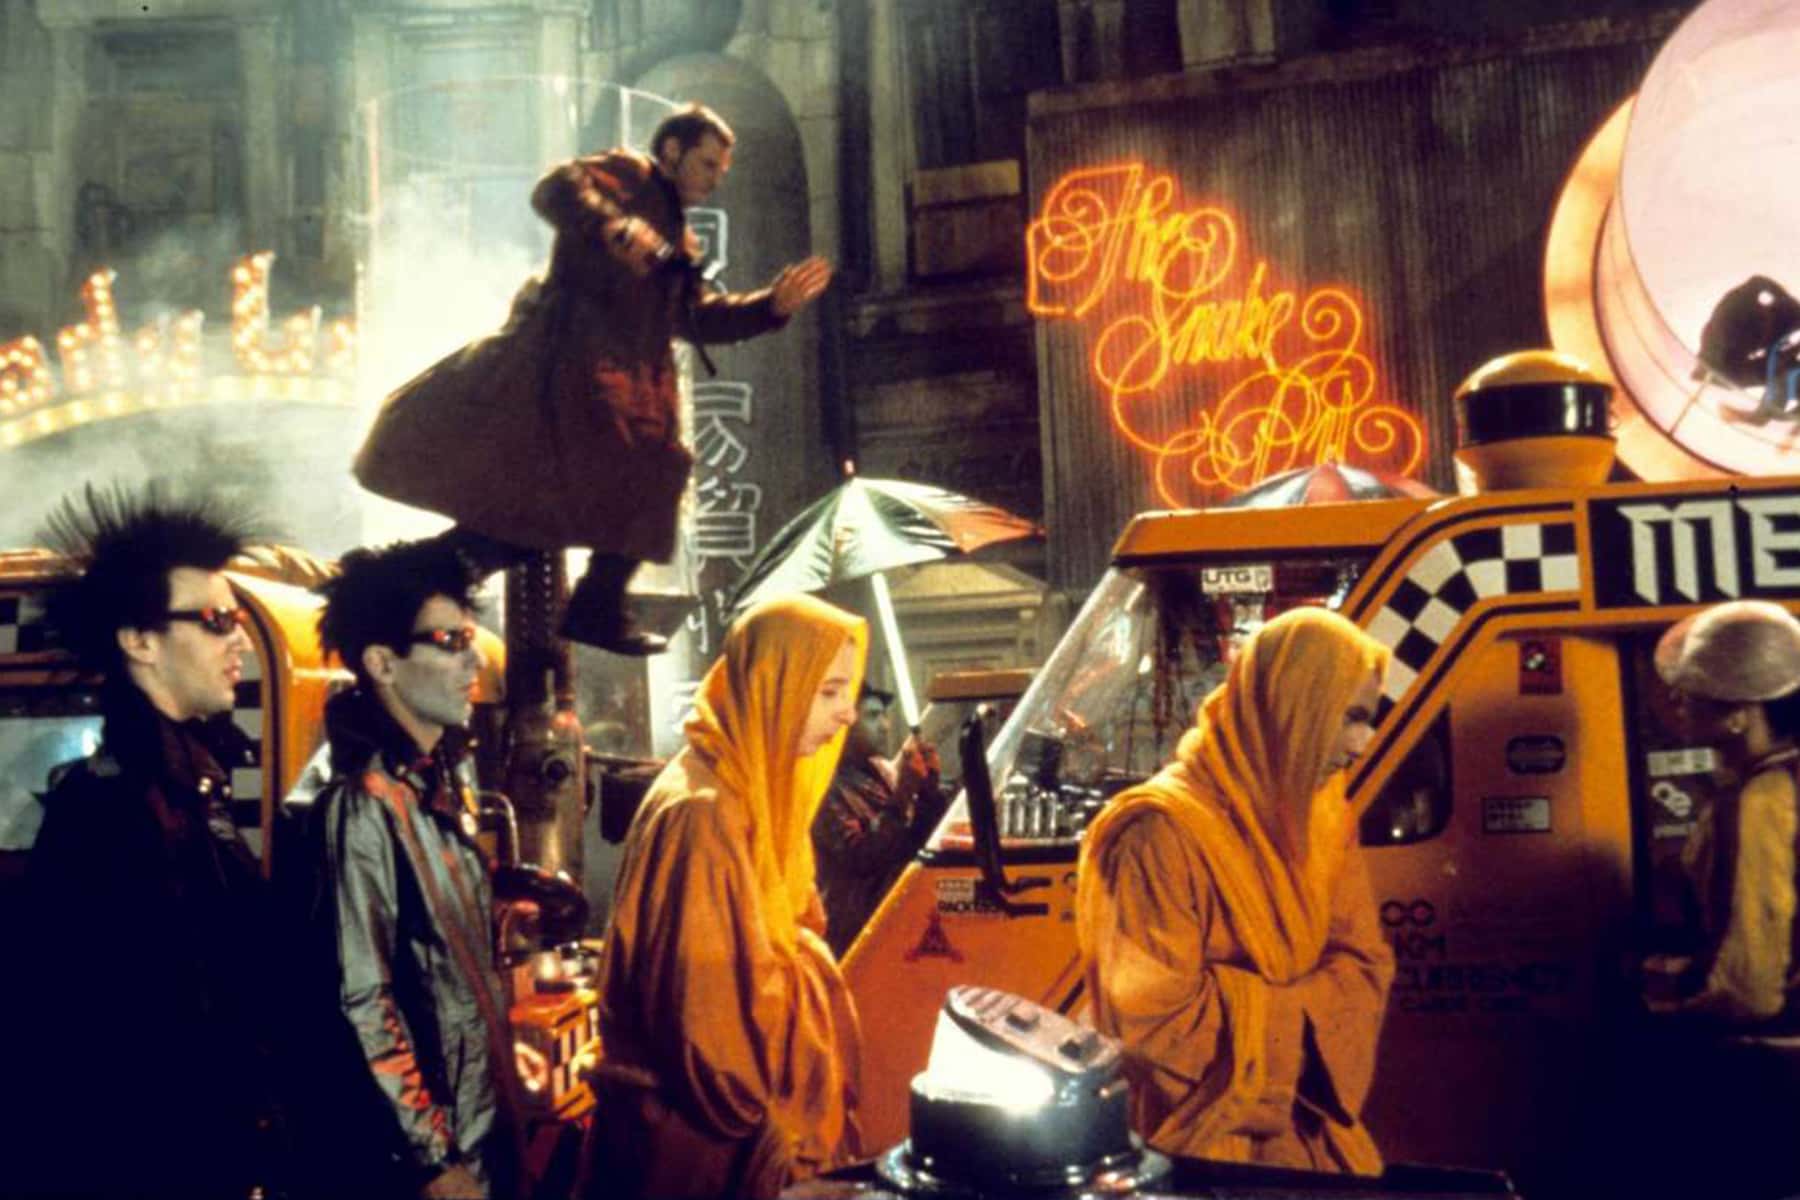 Hello from 1982: What the movie “Blade Runner predicted about 2019